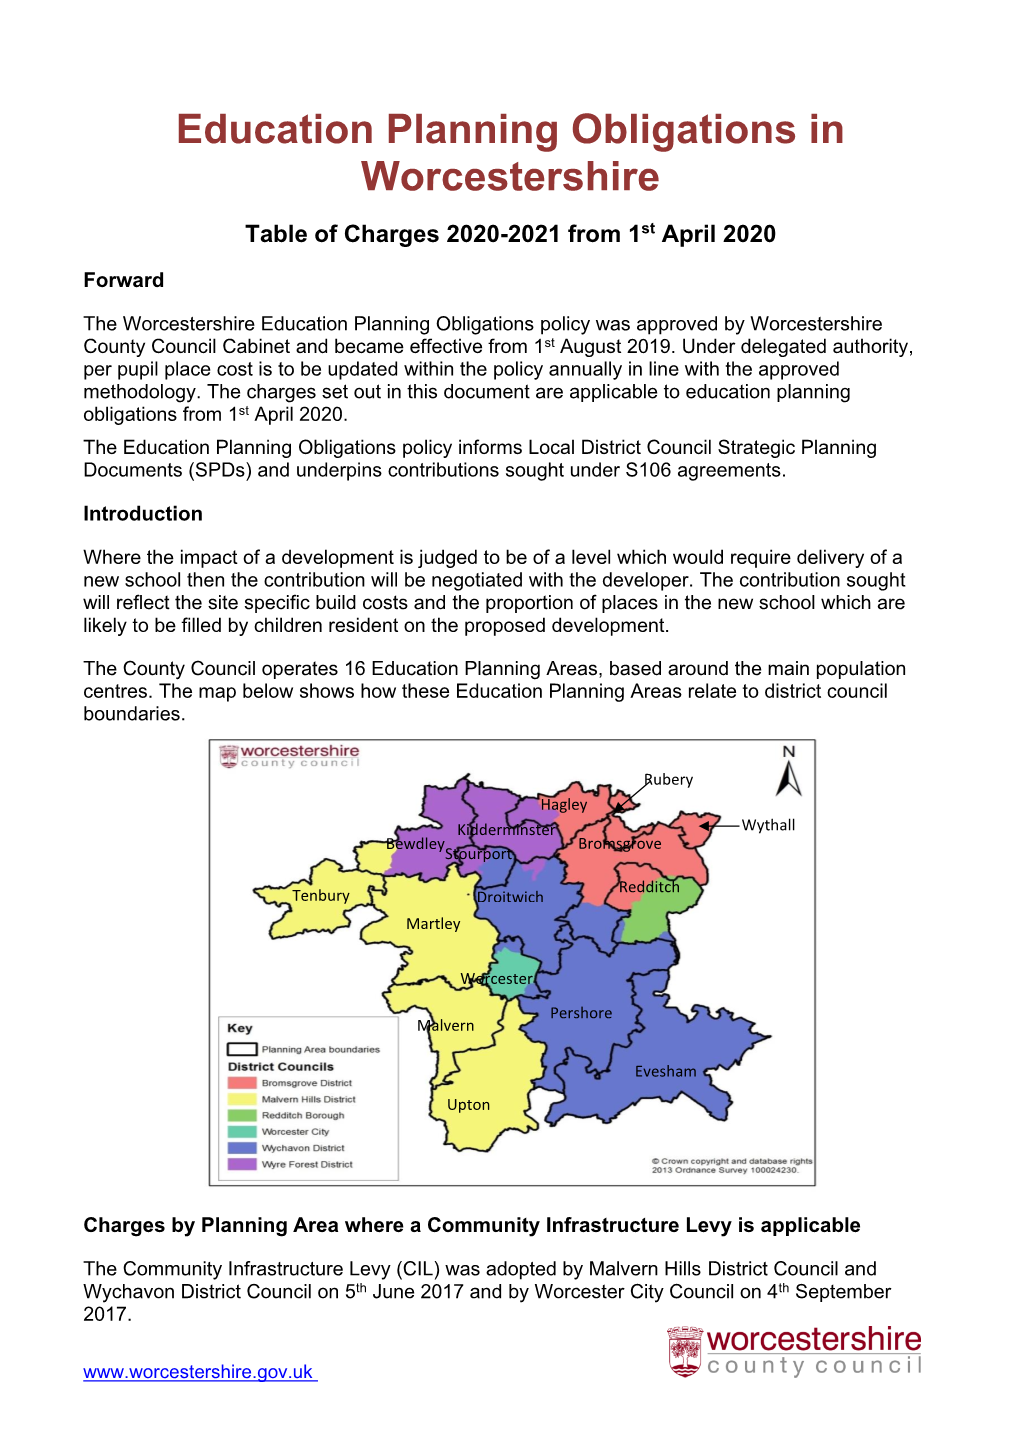 Education Planning Obligations in Worcestershire Table of Charges 2020-2021 from 1St April 2020